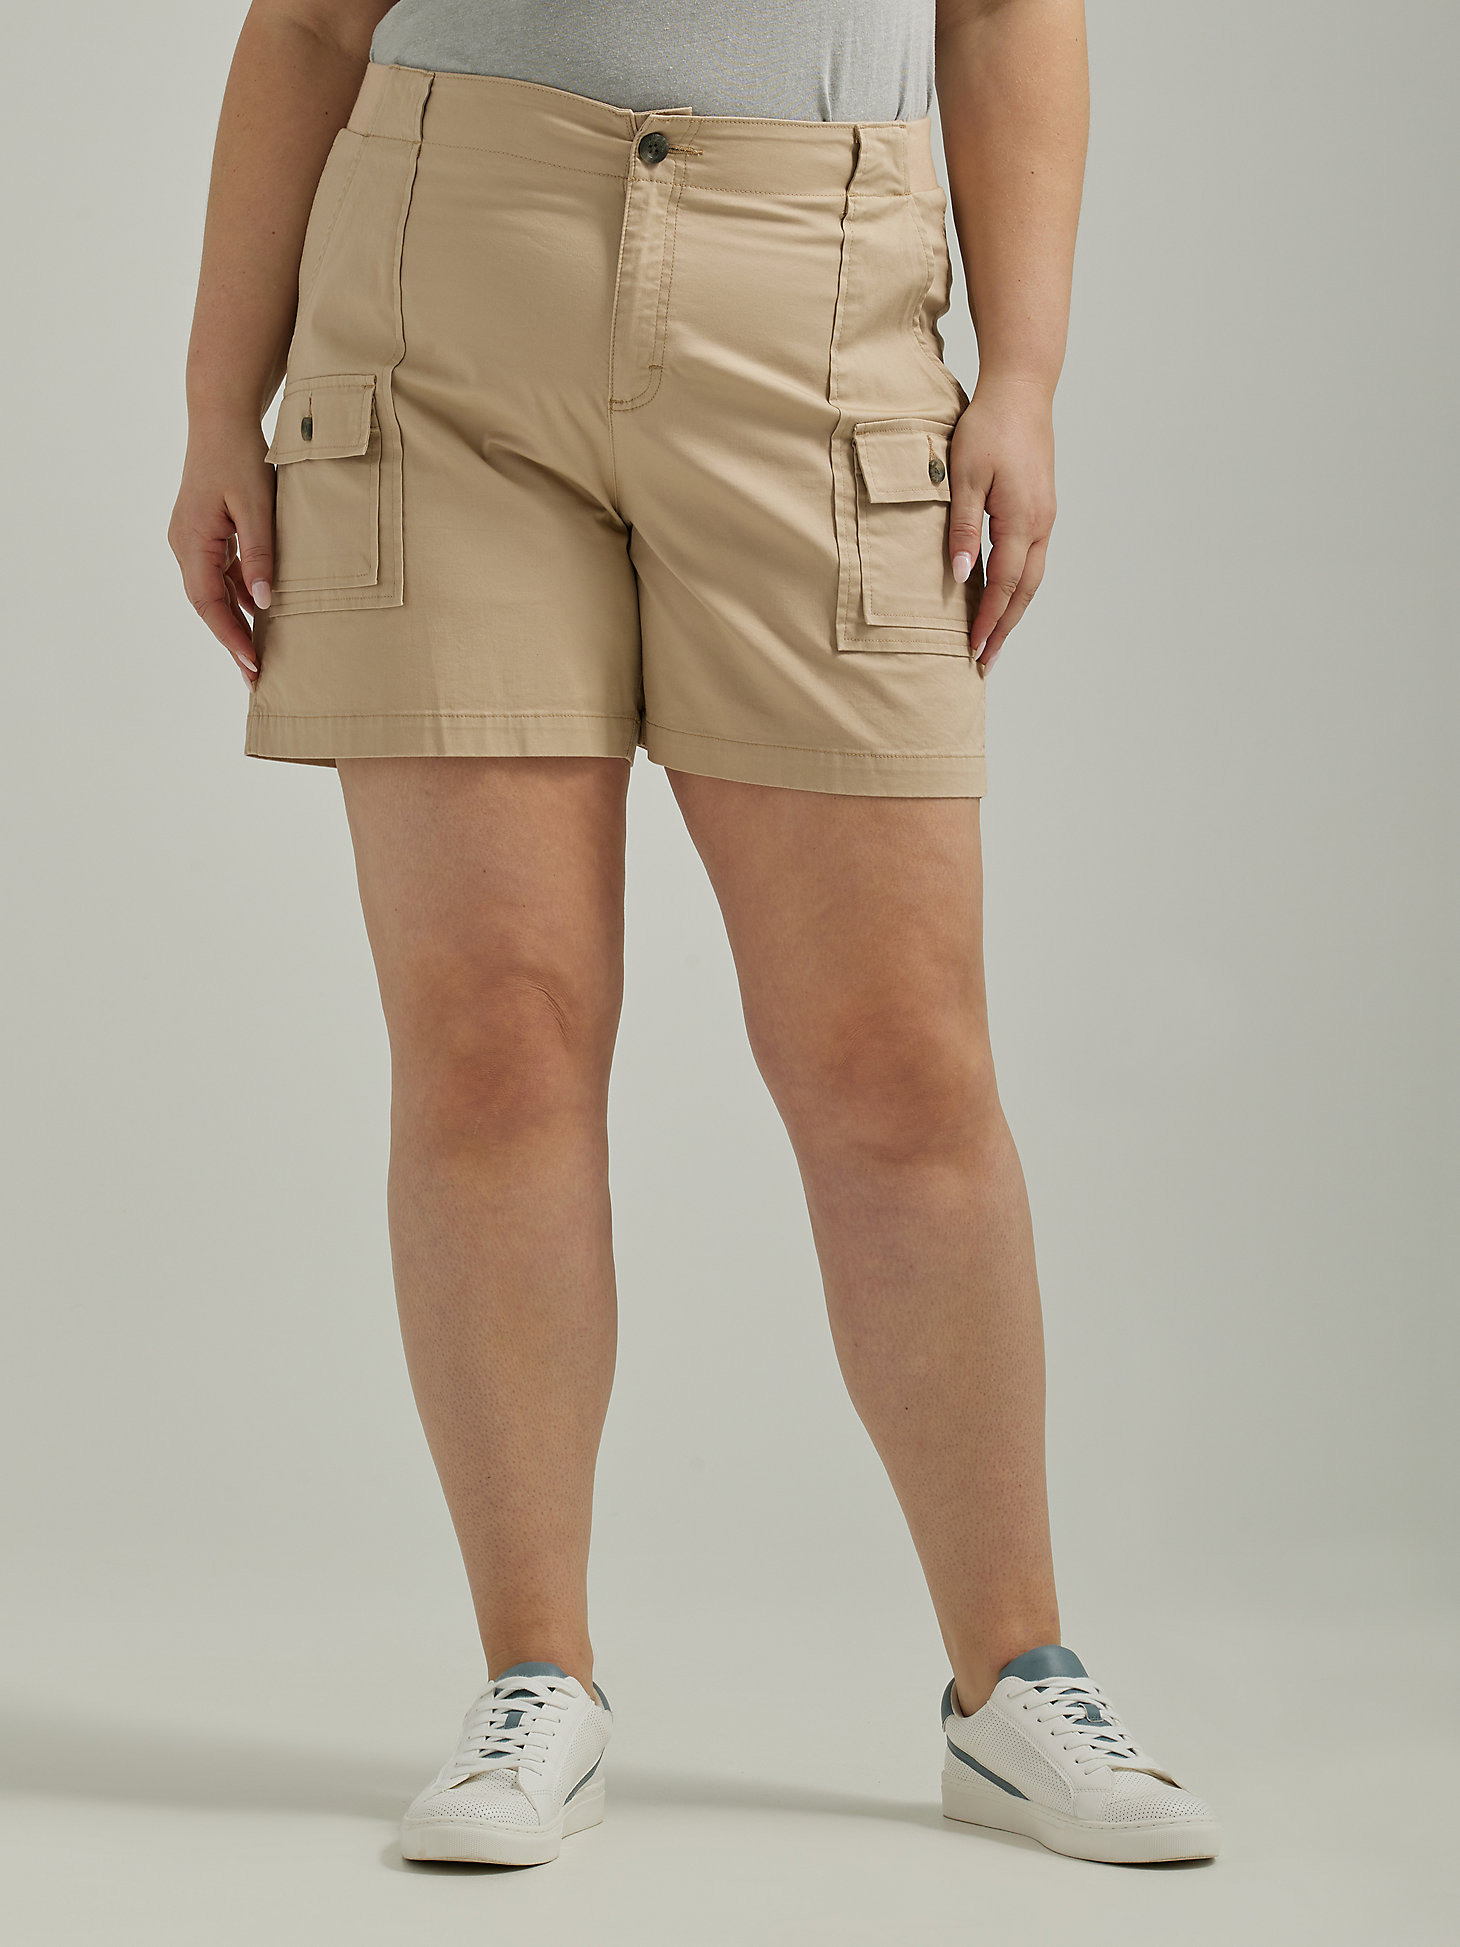 Women's Flex-to-Go Relaxed Fit Cargo Short (Plus) in Macrame main view